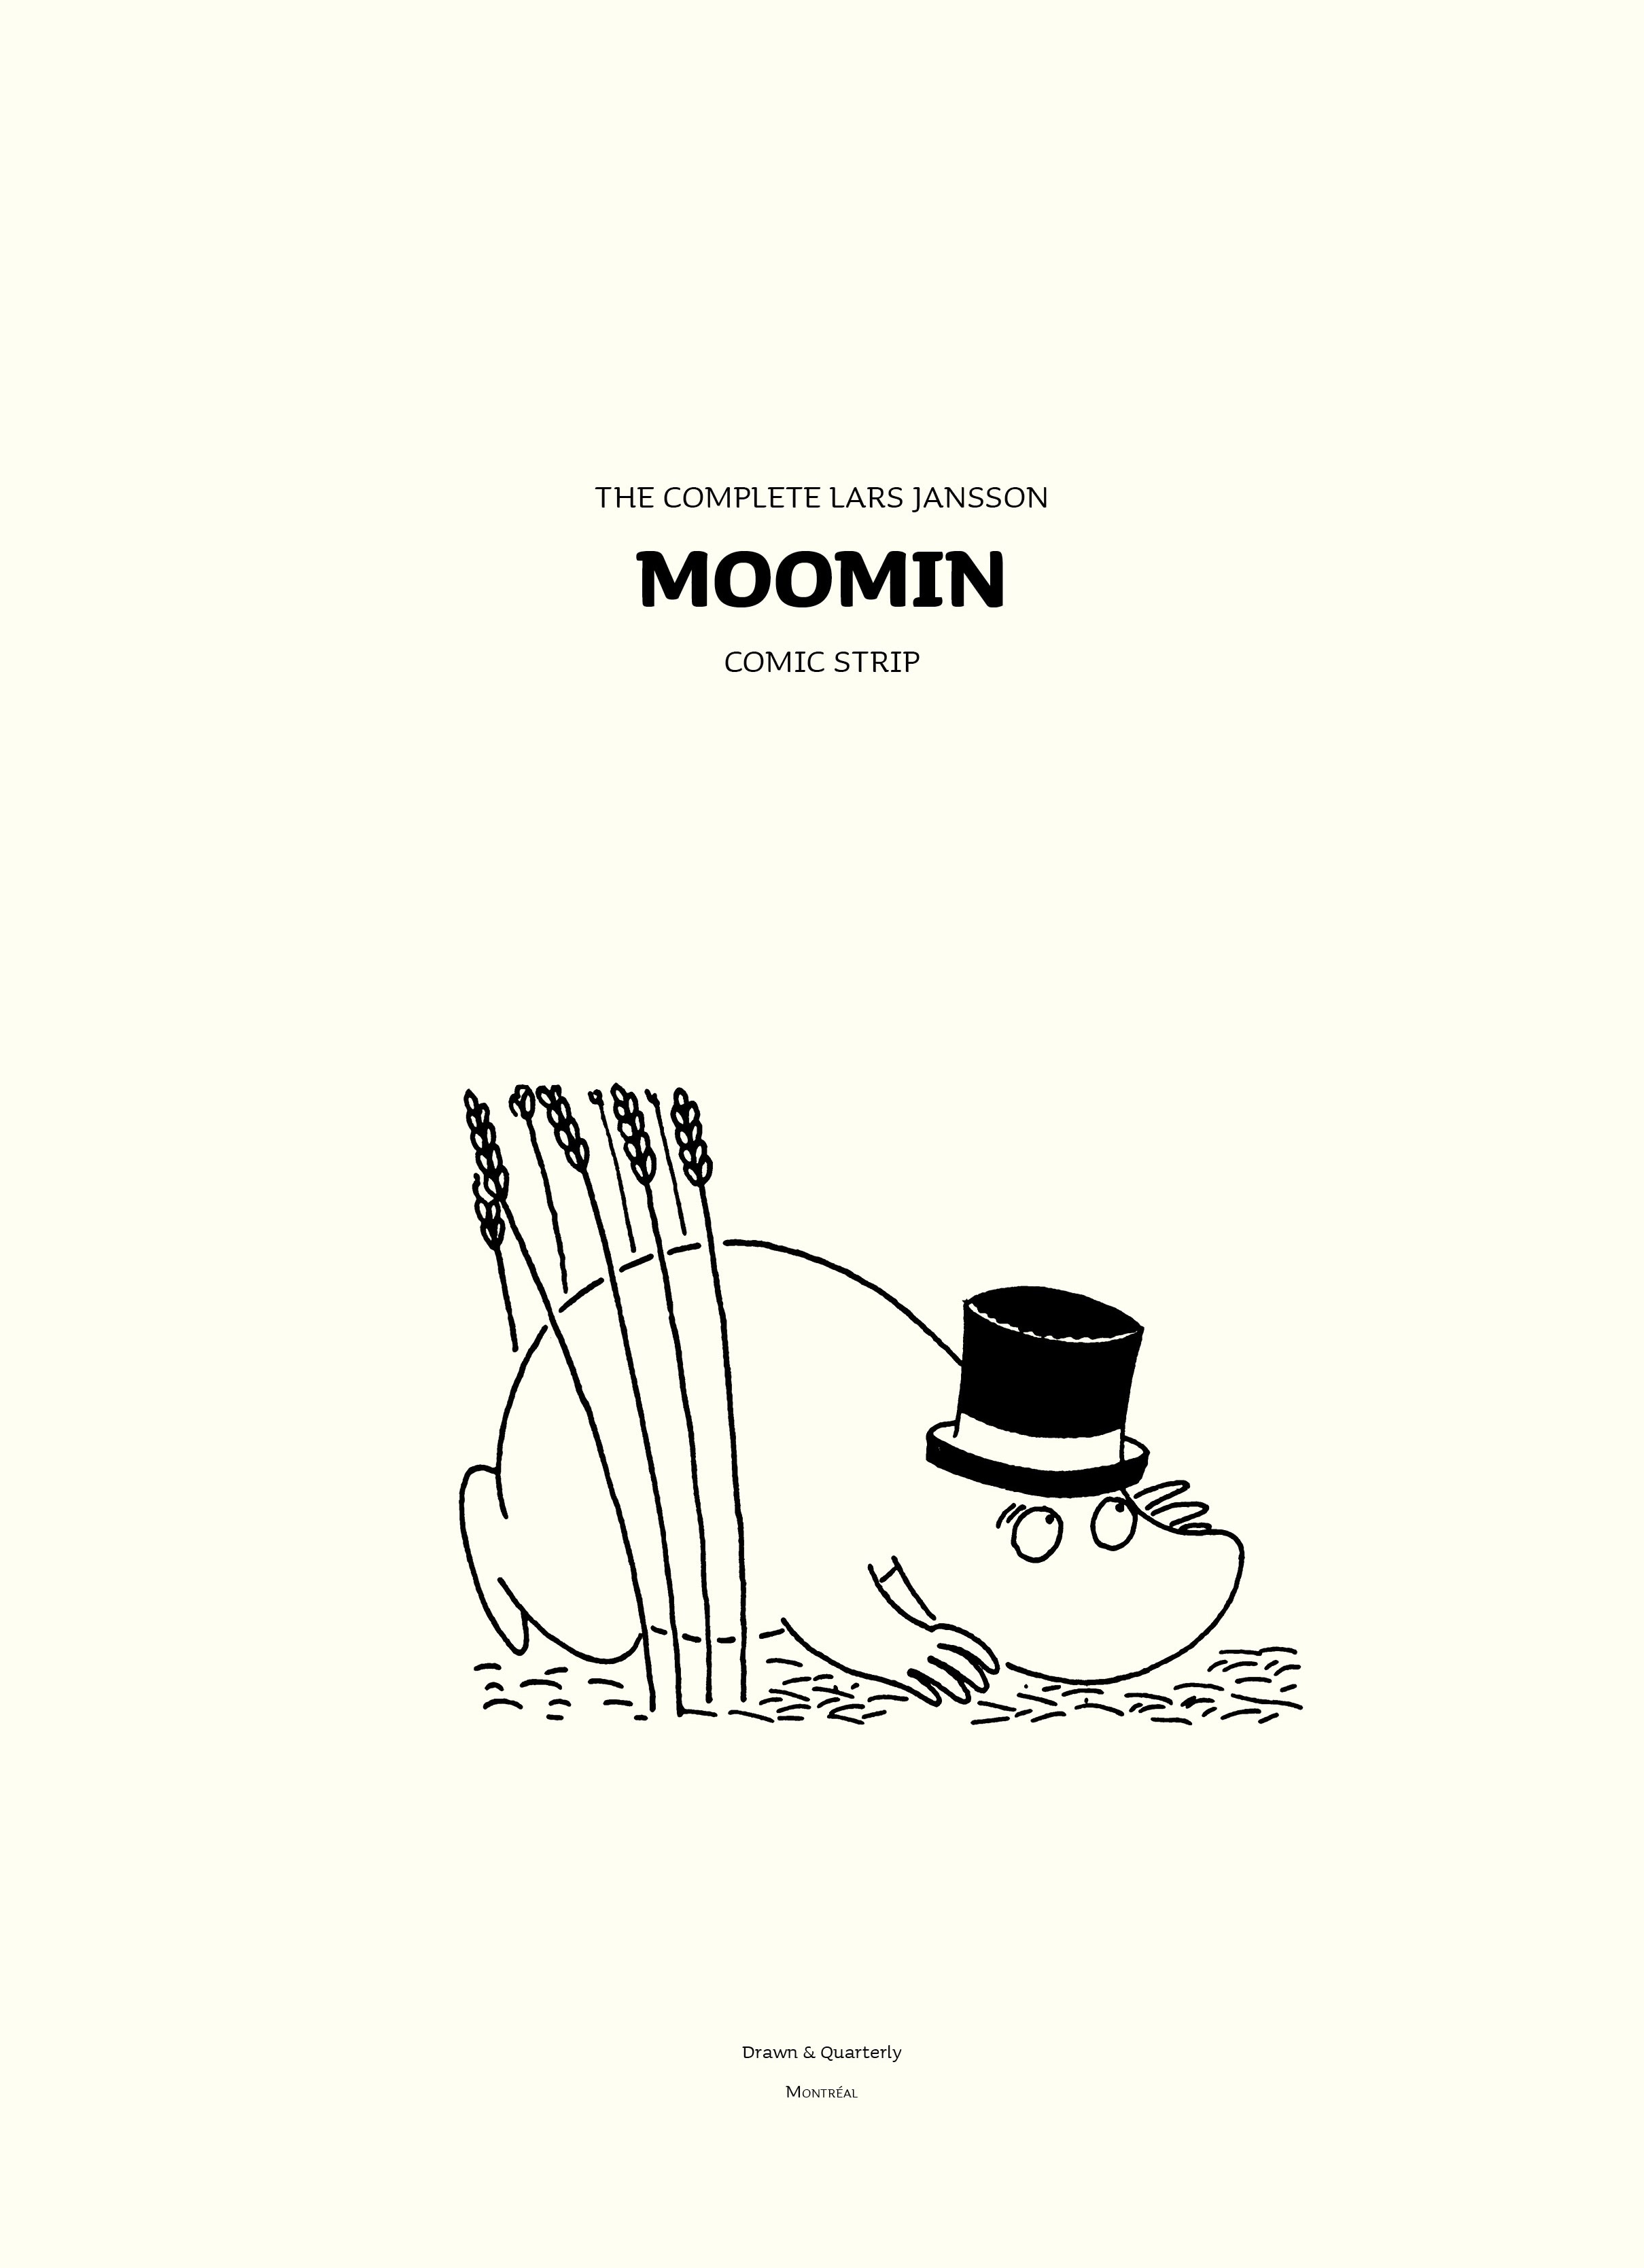 Read online Moomin: The Complete Lars Jansson Comic Strip comic -  Issue # TPB 7 - 3